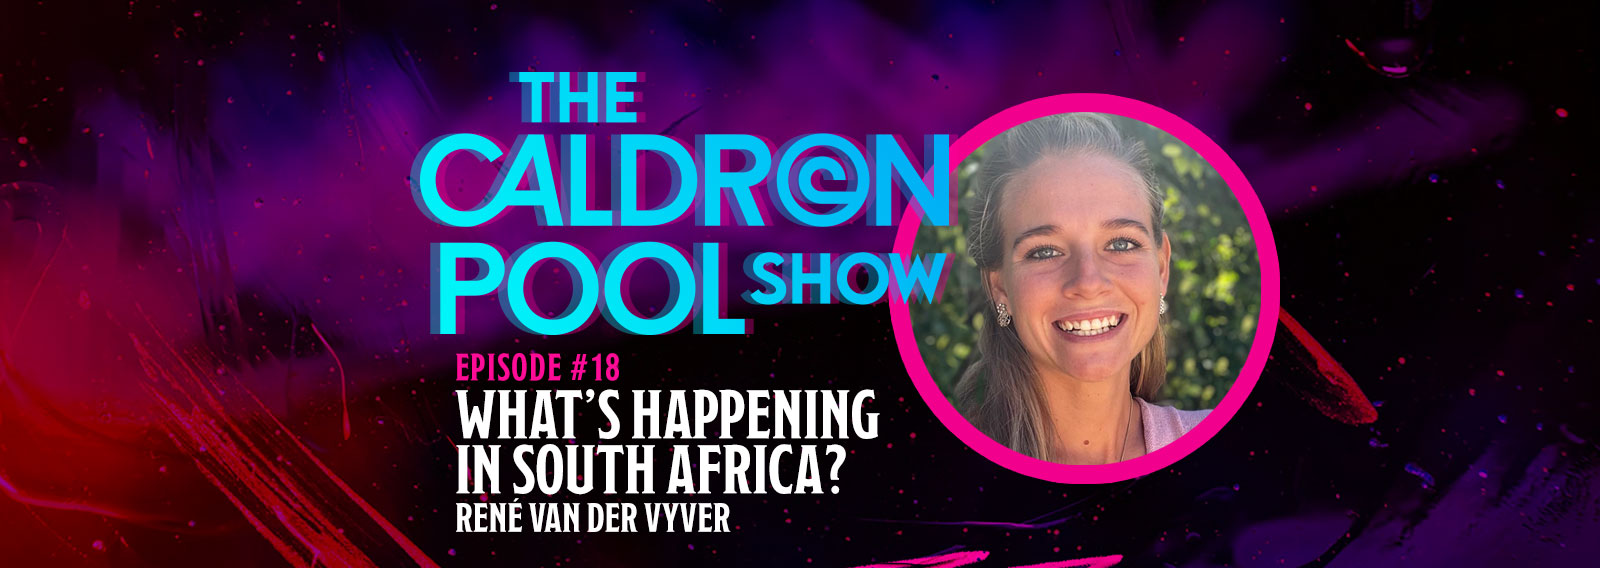 The Caldron Pool Show: #18 – What’s Happening In South Africa? With René van der Vyver